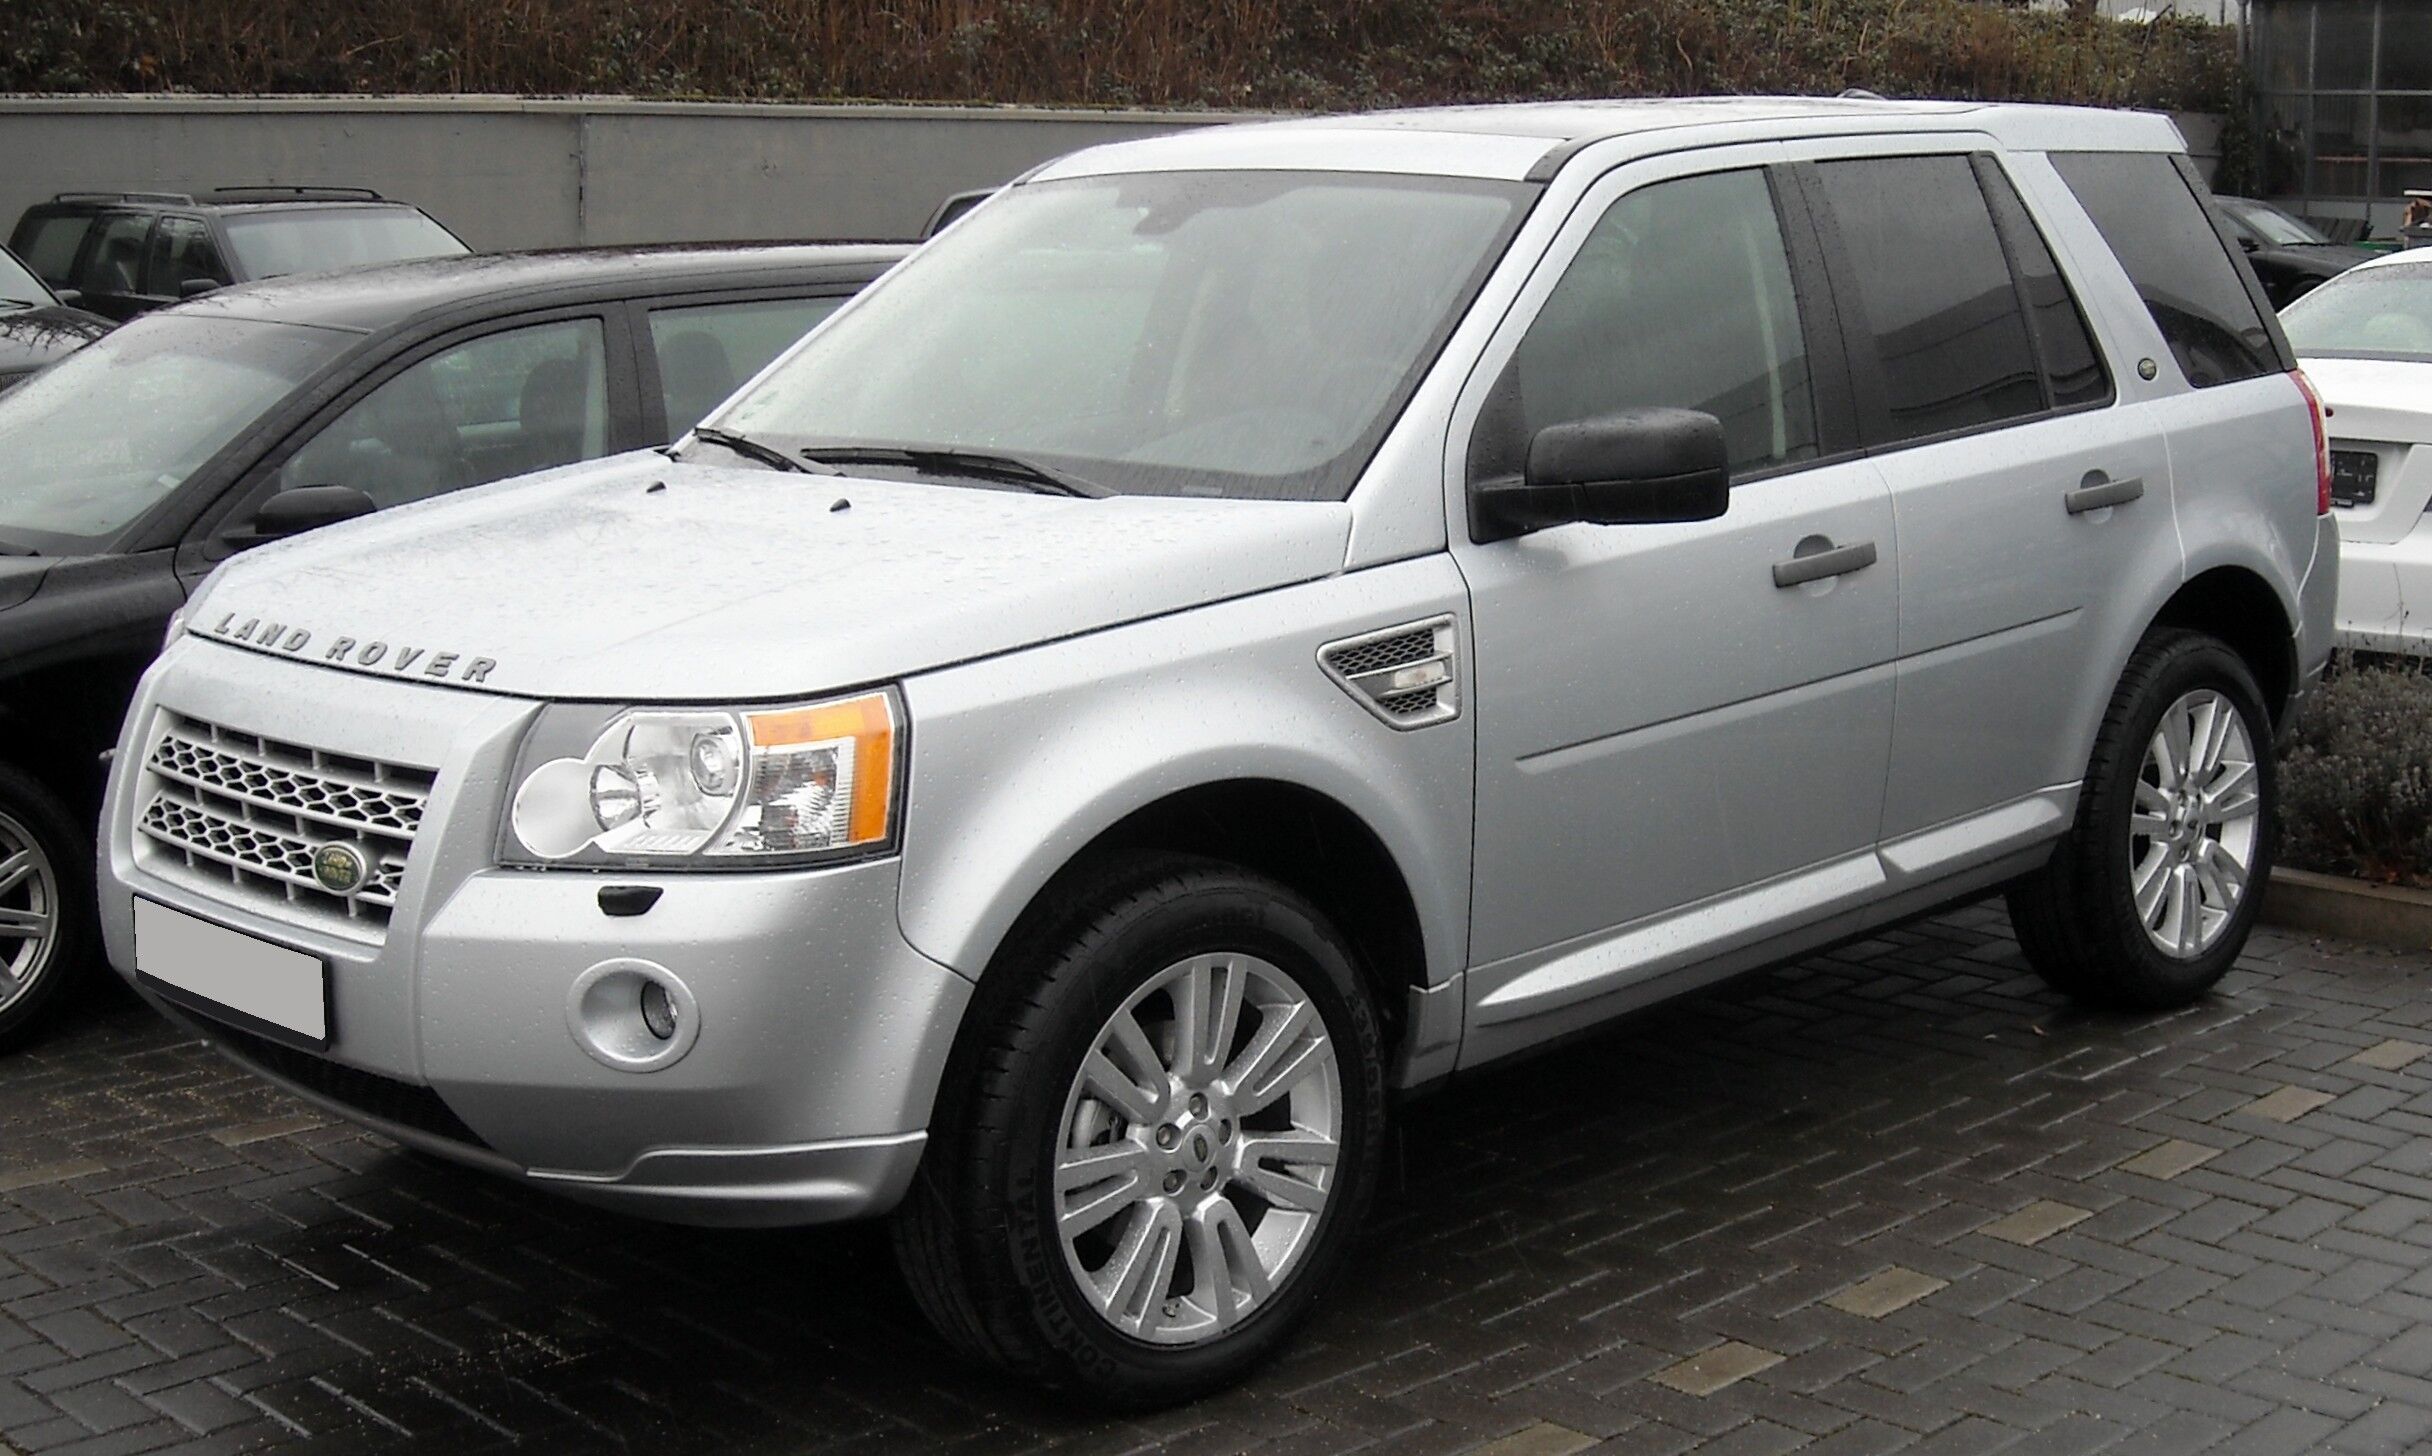 https://static.wikia.nocookie.net/tractors/images/5/5f/Land_Rover_Freelander_II_front_20090118.jpg/revision/latest/scale-to-width-down/2432?cb=20110401221026